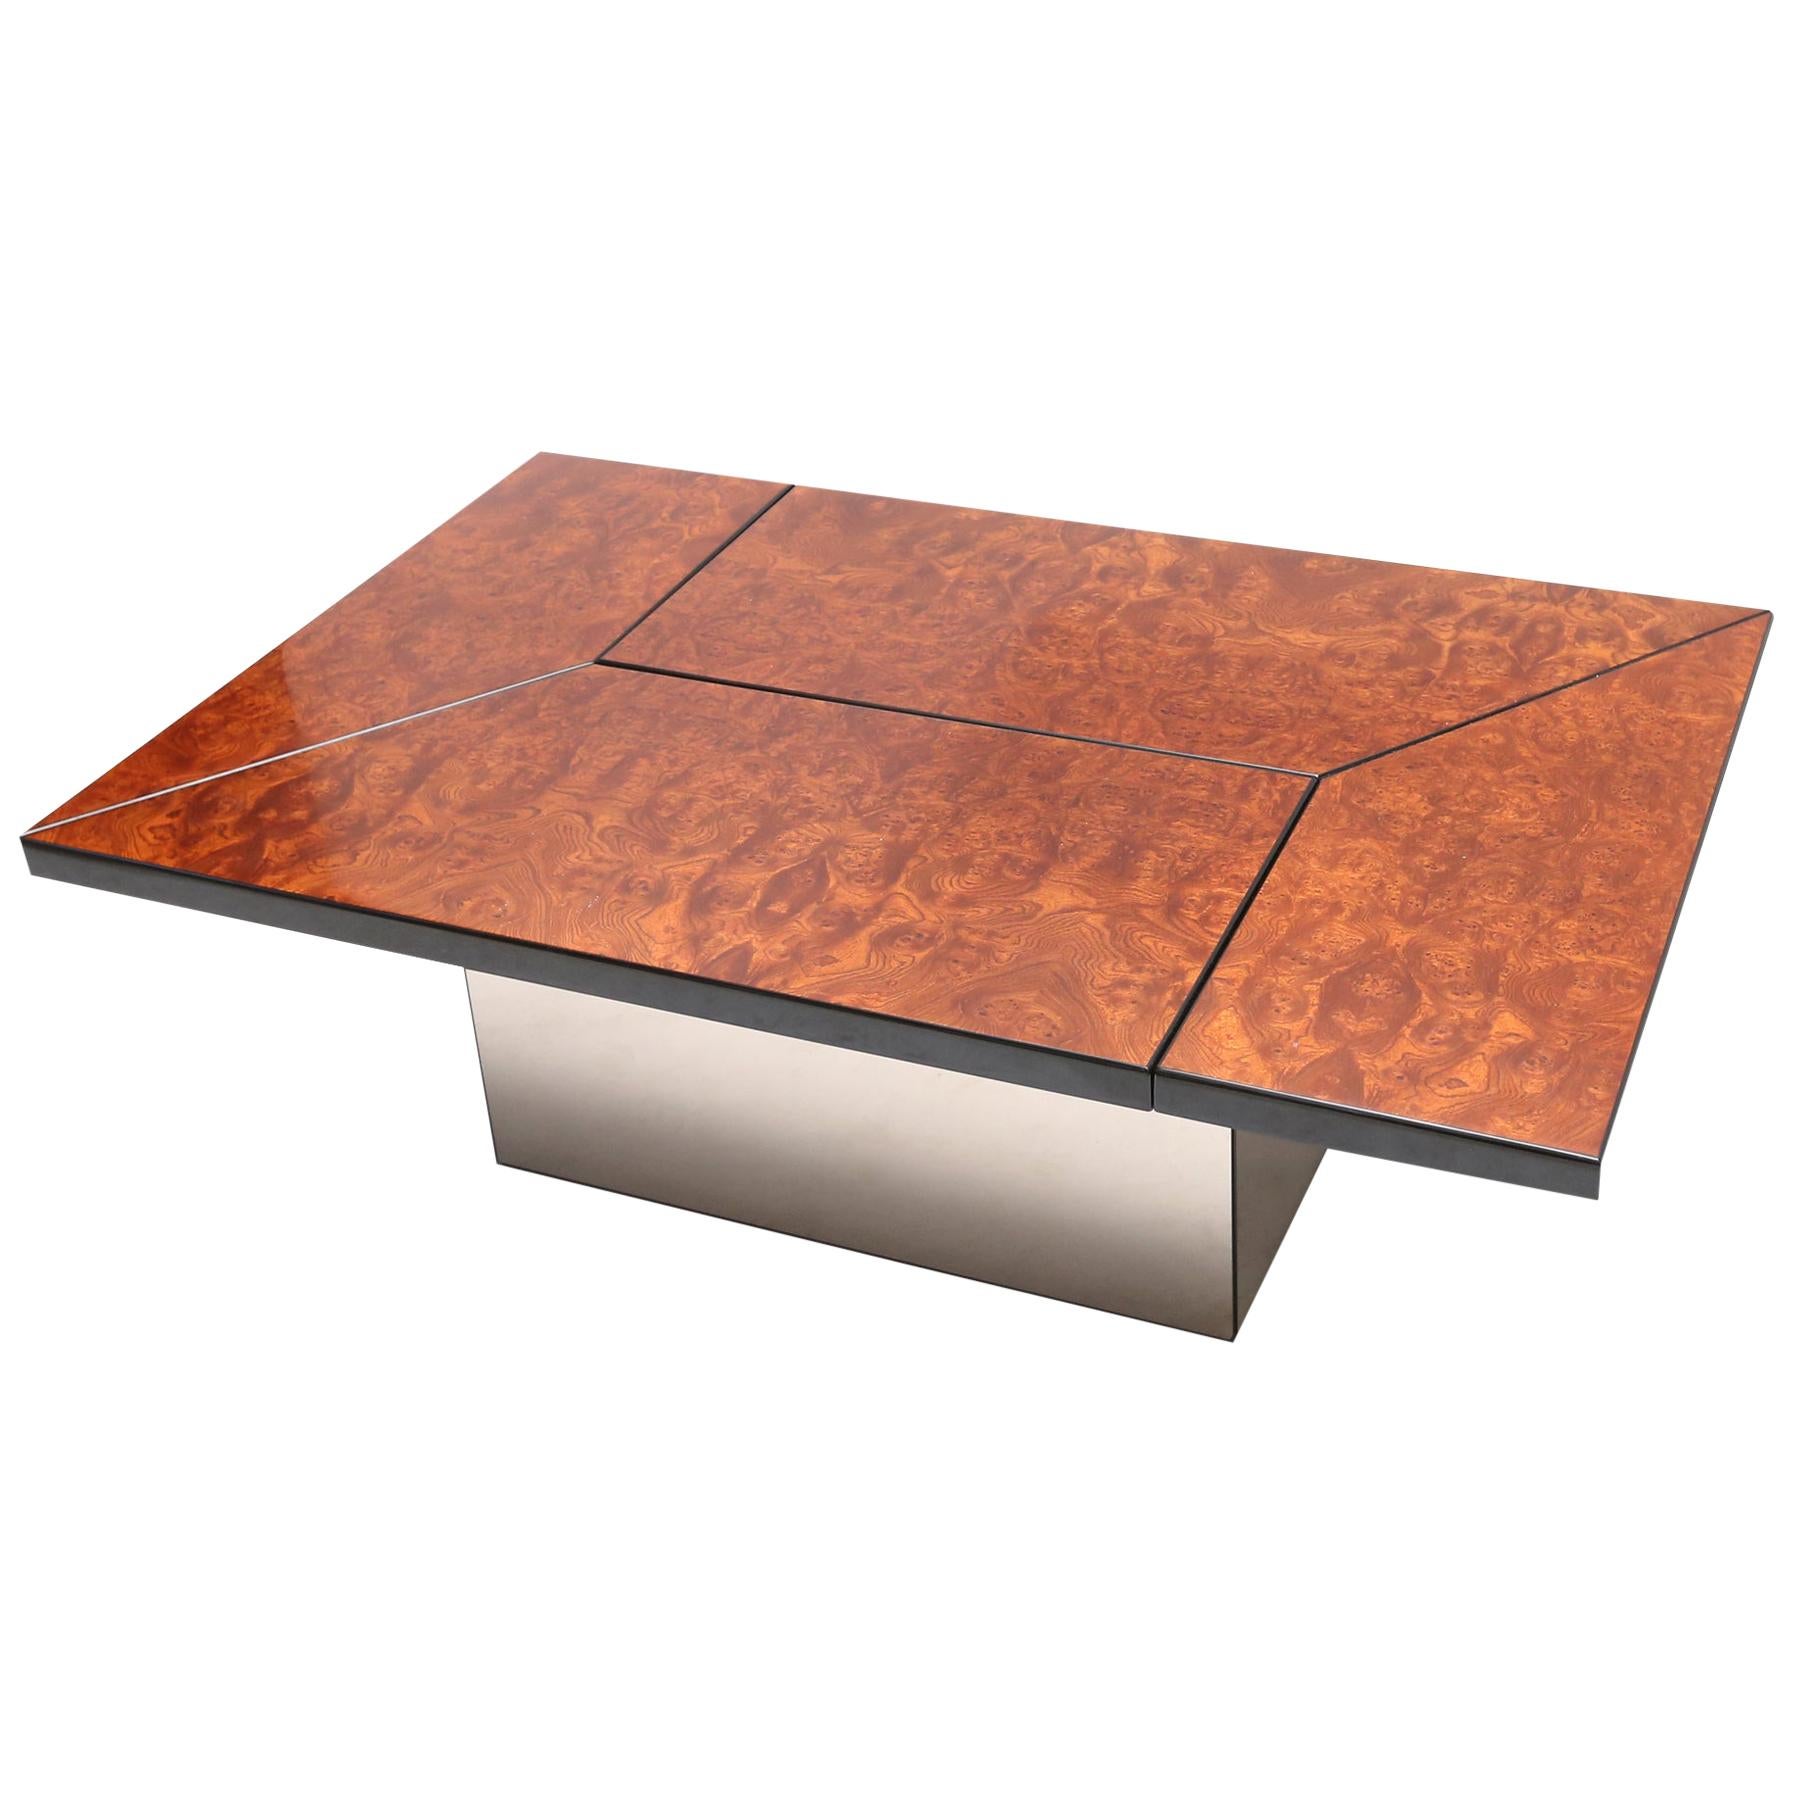 Lacquered Burl Veneer Sliding Coffee Table with Hidden Dry Bar by Paul Frank